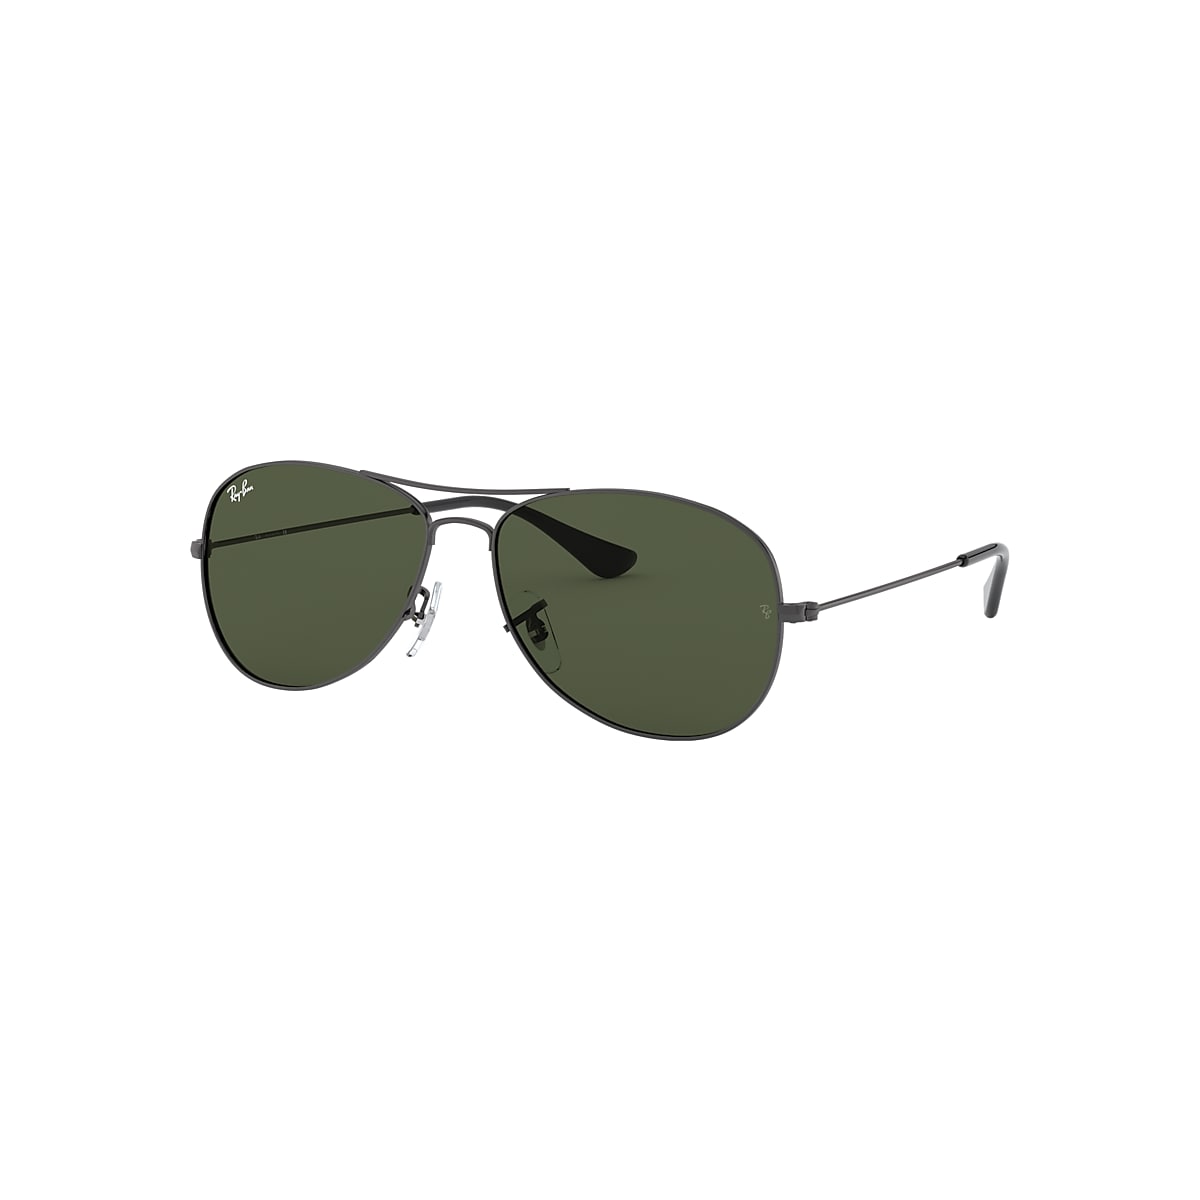 Cockpit Sunglasses in Gunmetal and Green | Ray-Ban®